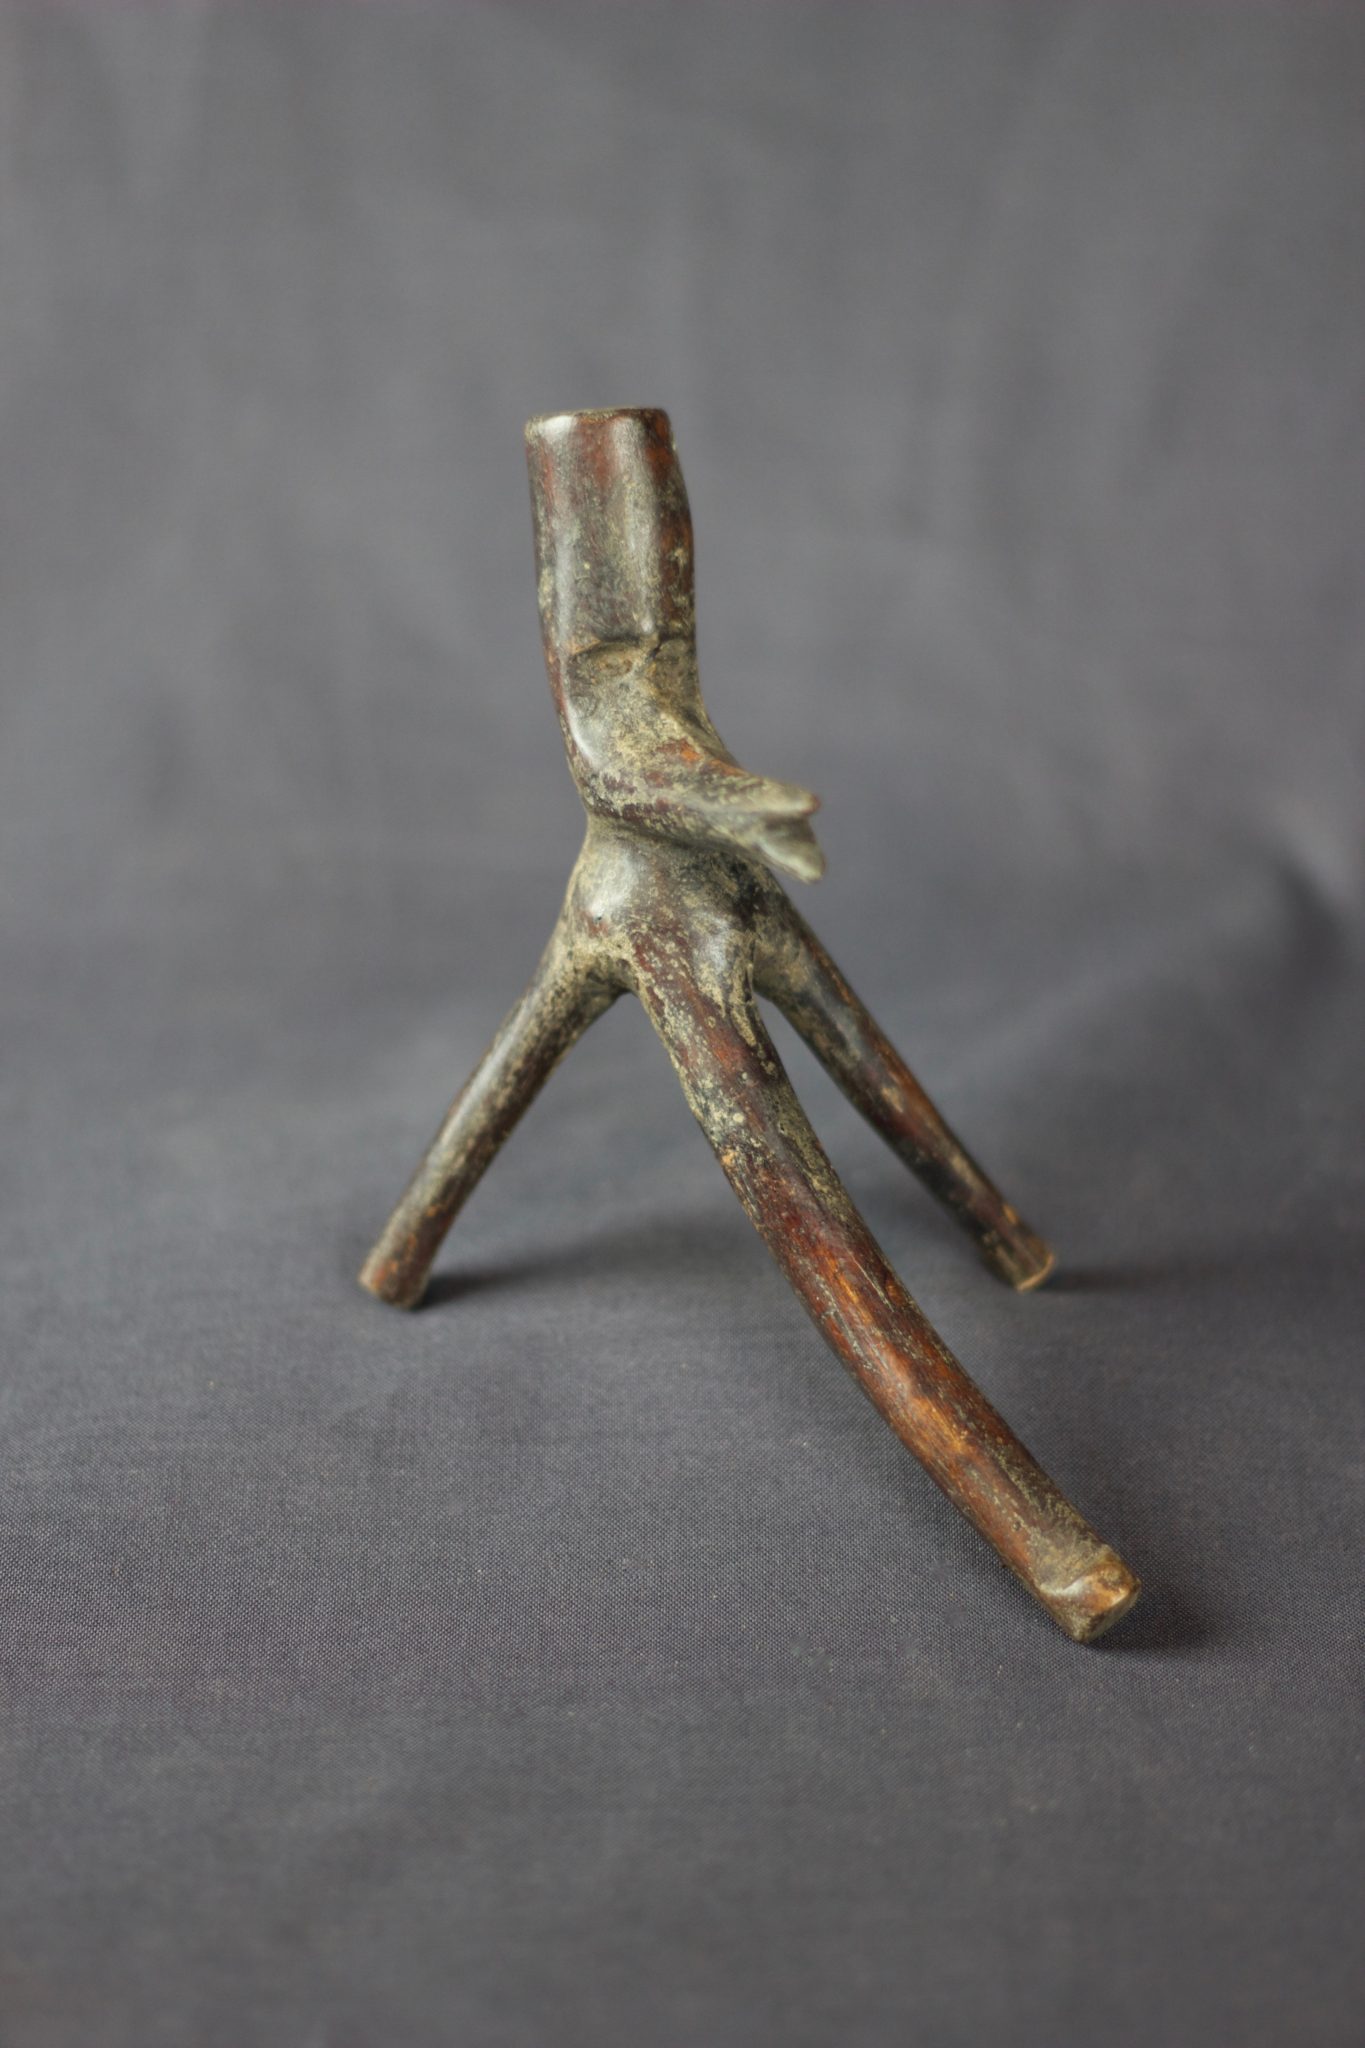 Shaman Healing Amulet/Talisman, Kalimantan, Borneo, Indonesia, Dayak tribe, Early to mid 20th c, Wood, patinated with use and age Used for healing rituals. 4 ¾” x 4” x 5”. $70.